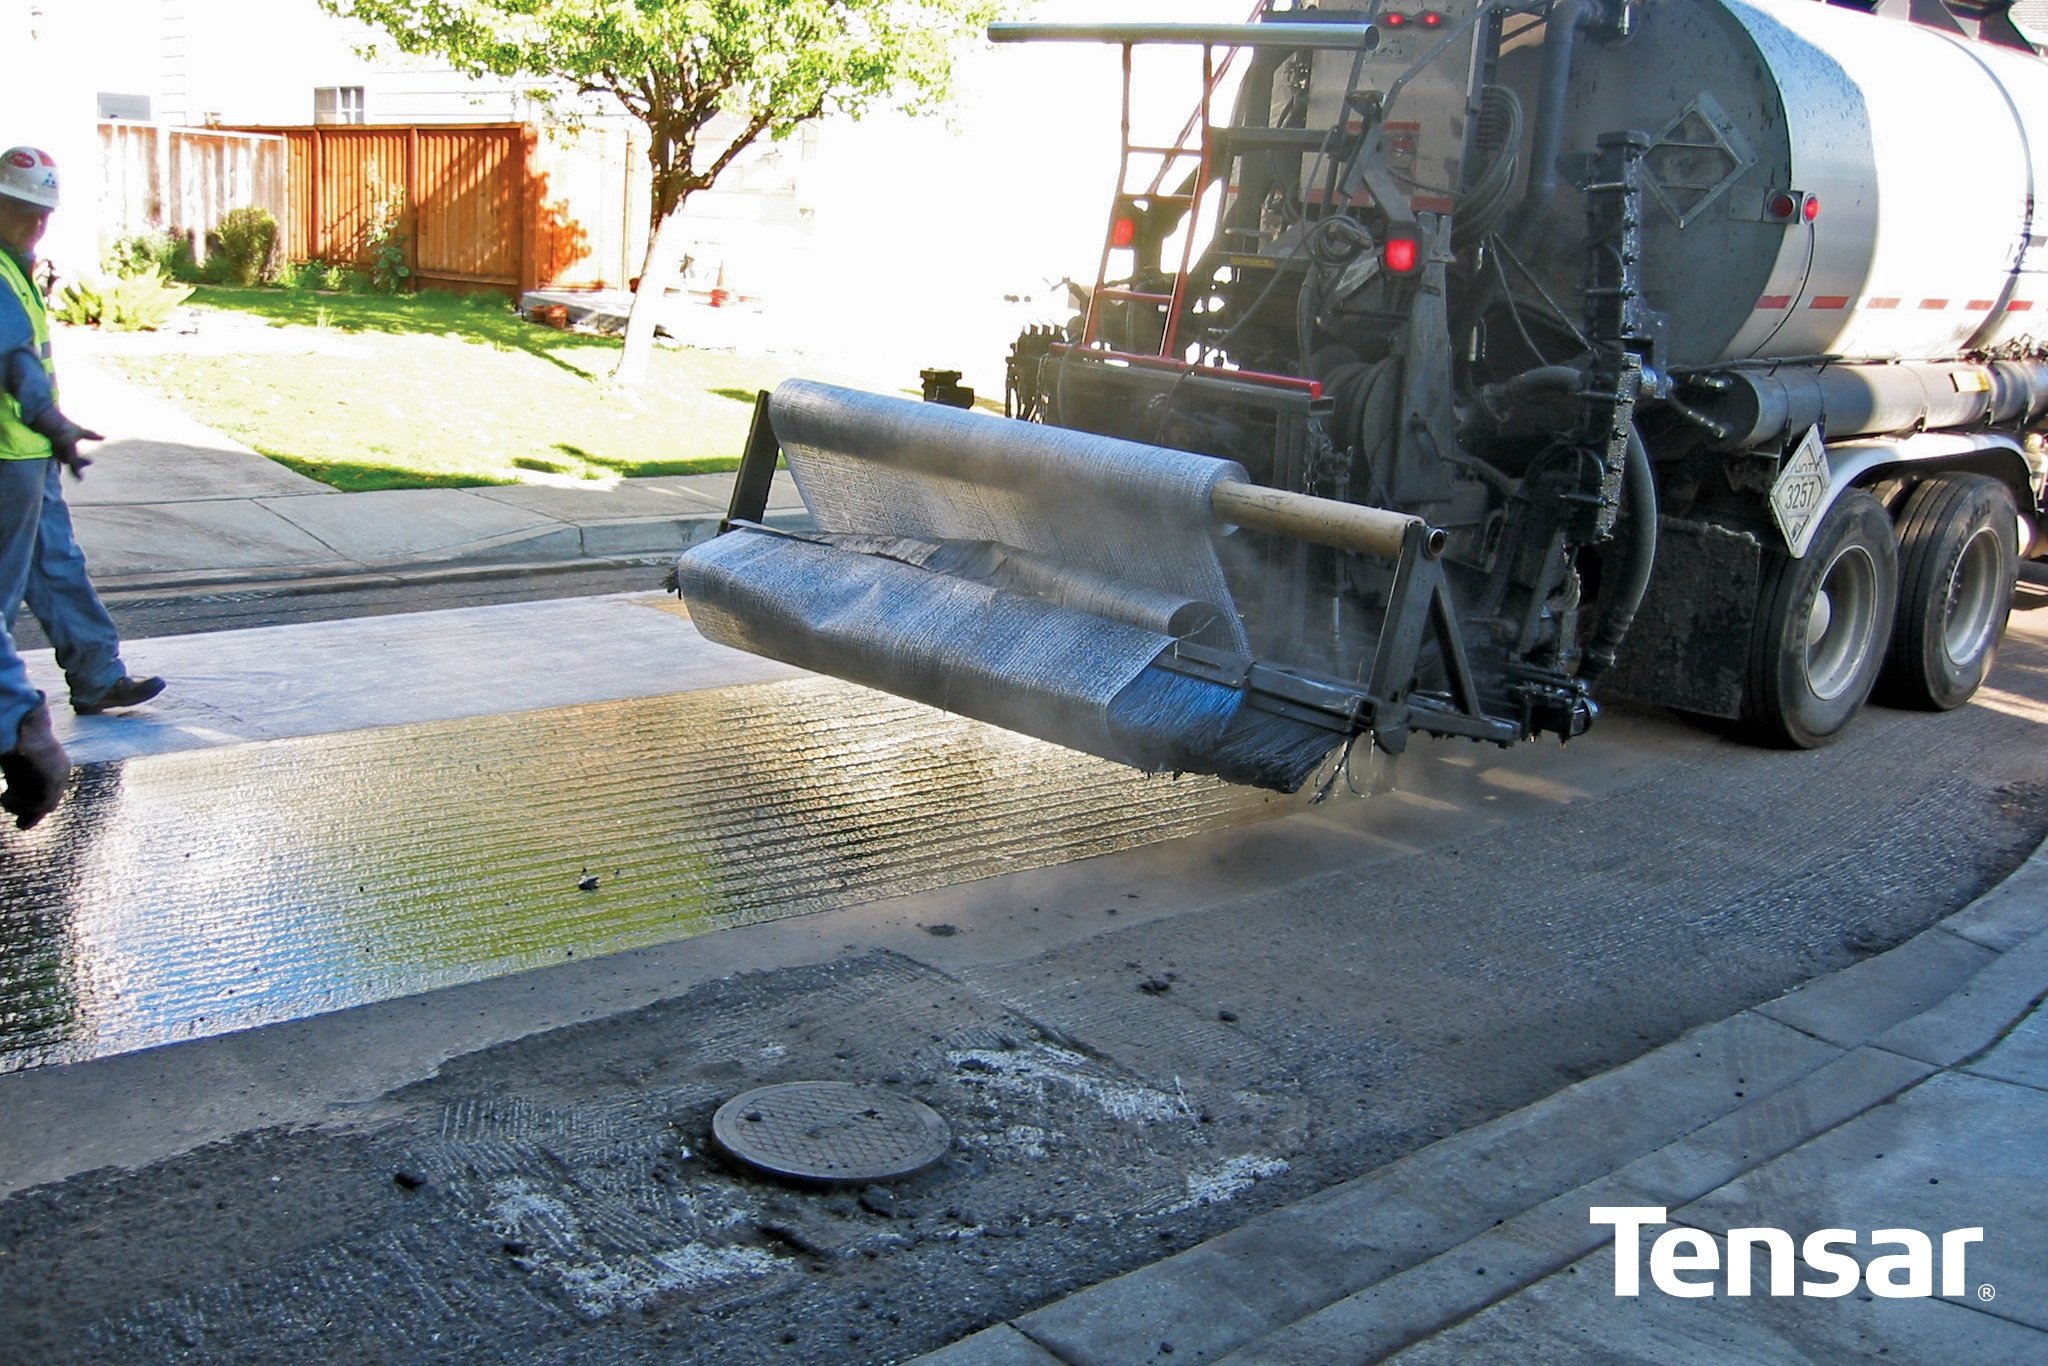 Reflective Cracking in Your Pavement?... Use Geosynthetics